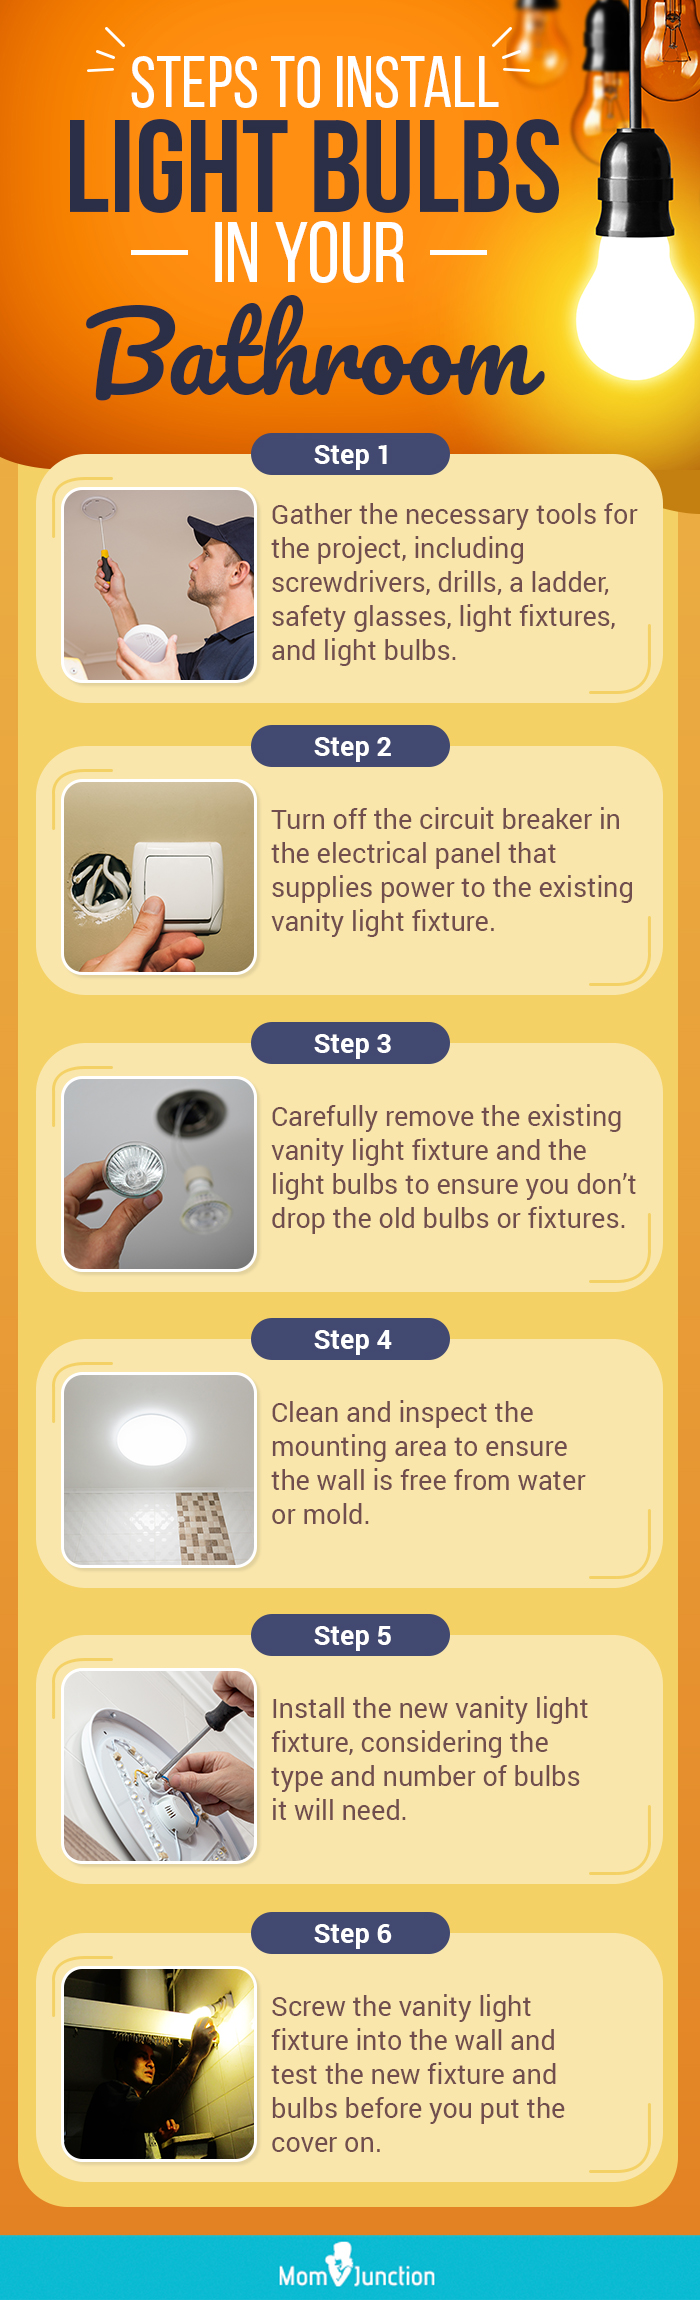 Steps To Install Light Bulbs In Your Bathroom (infographic)